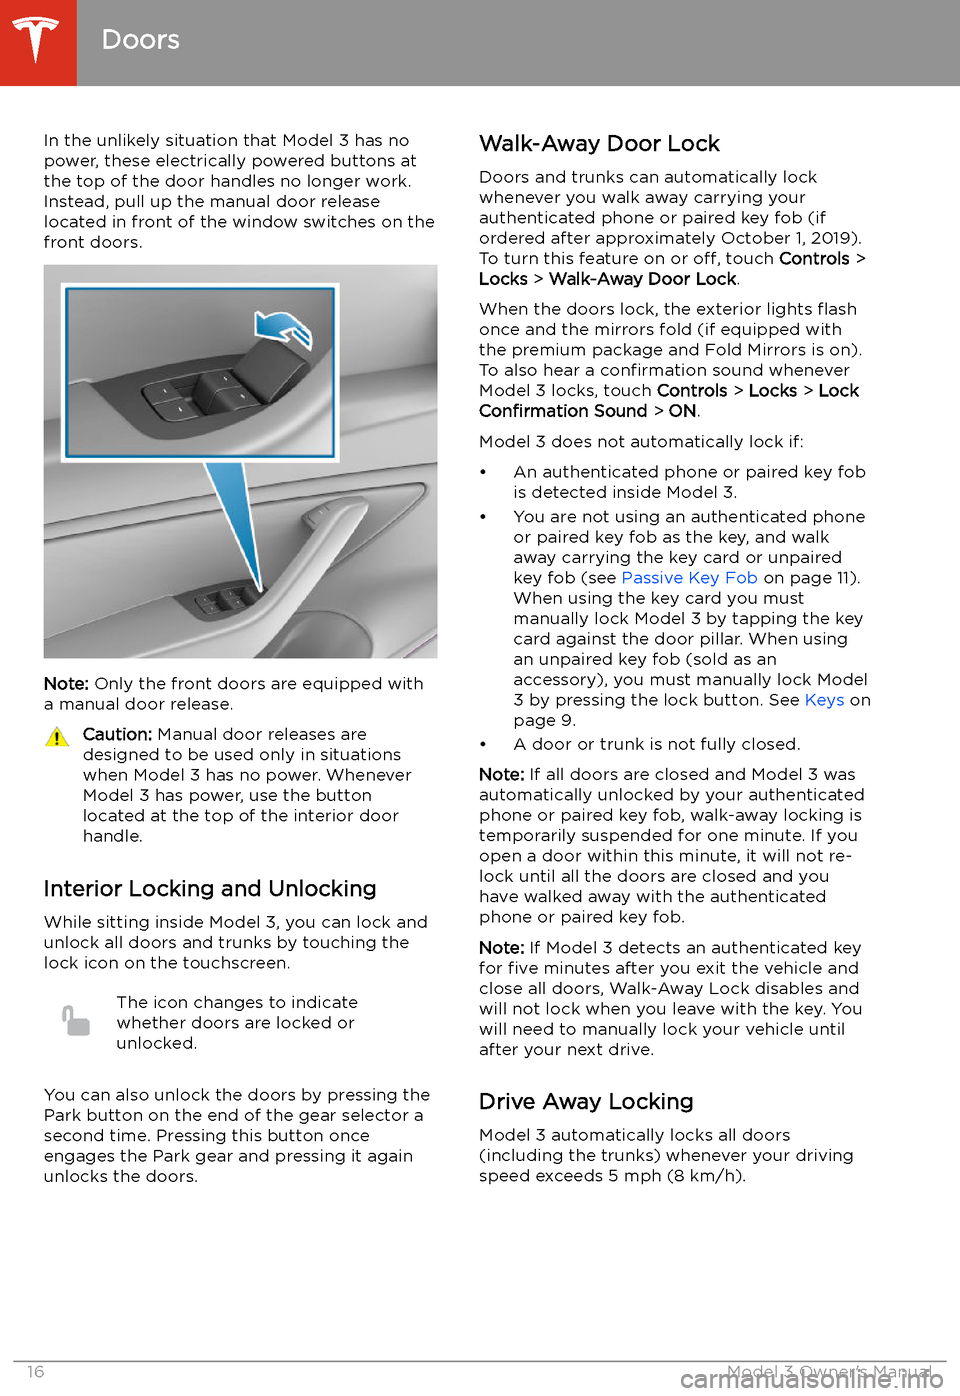 TESLA MODEL 3 2020  Owners Manuals In the unlikely situation that Model 3 has nopower, these electrically powered buttons at
the top of the door handles no longer work.
Instead, pull up the manual door release
located in front of the w